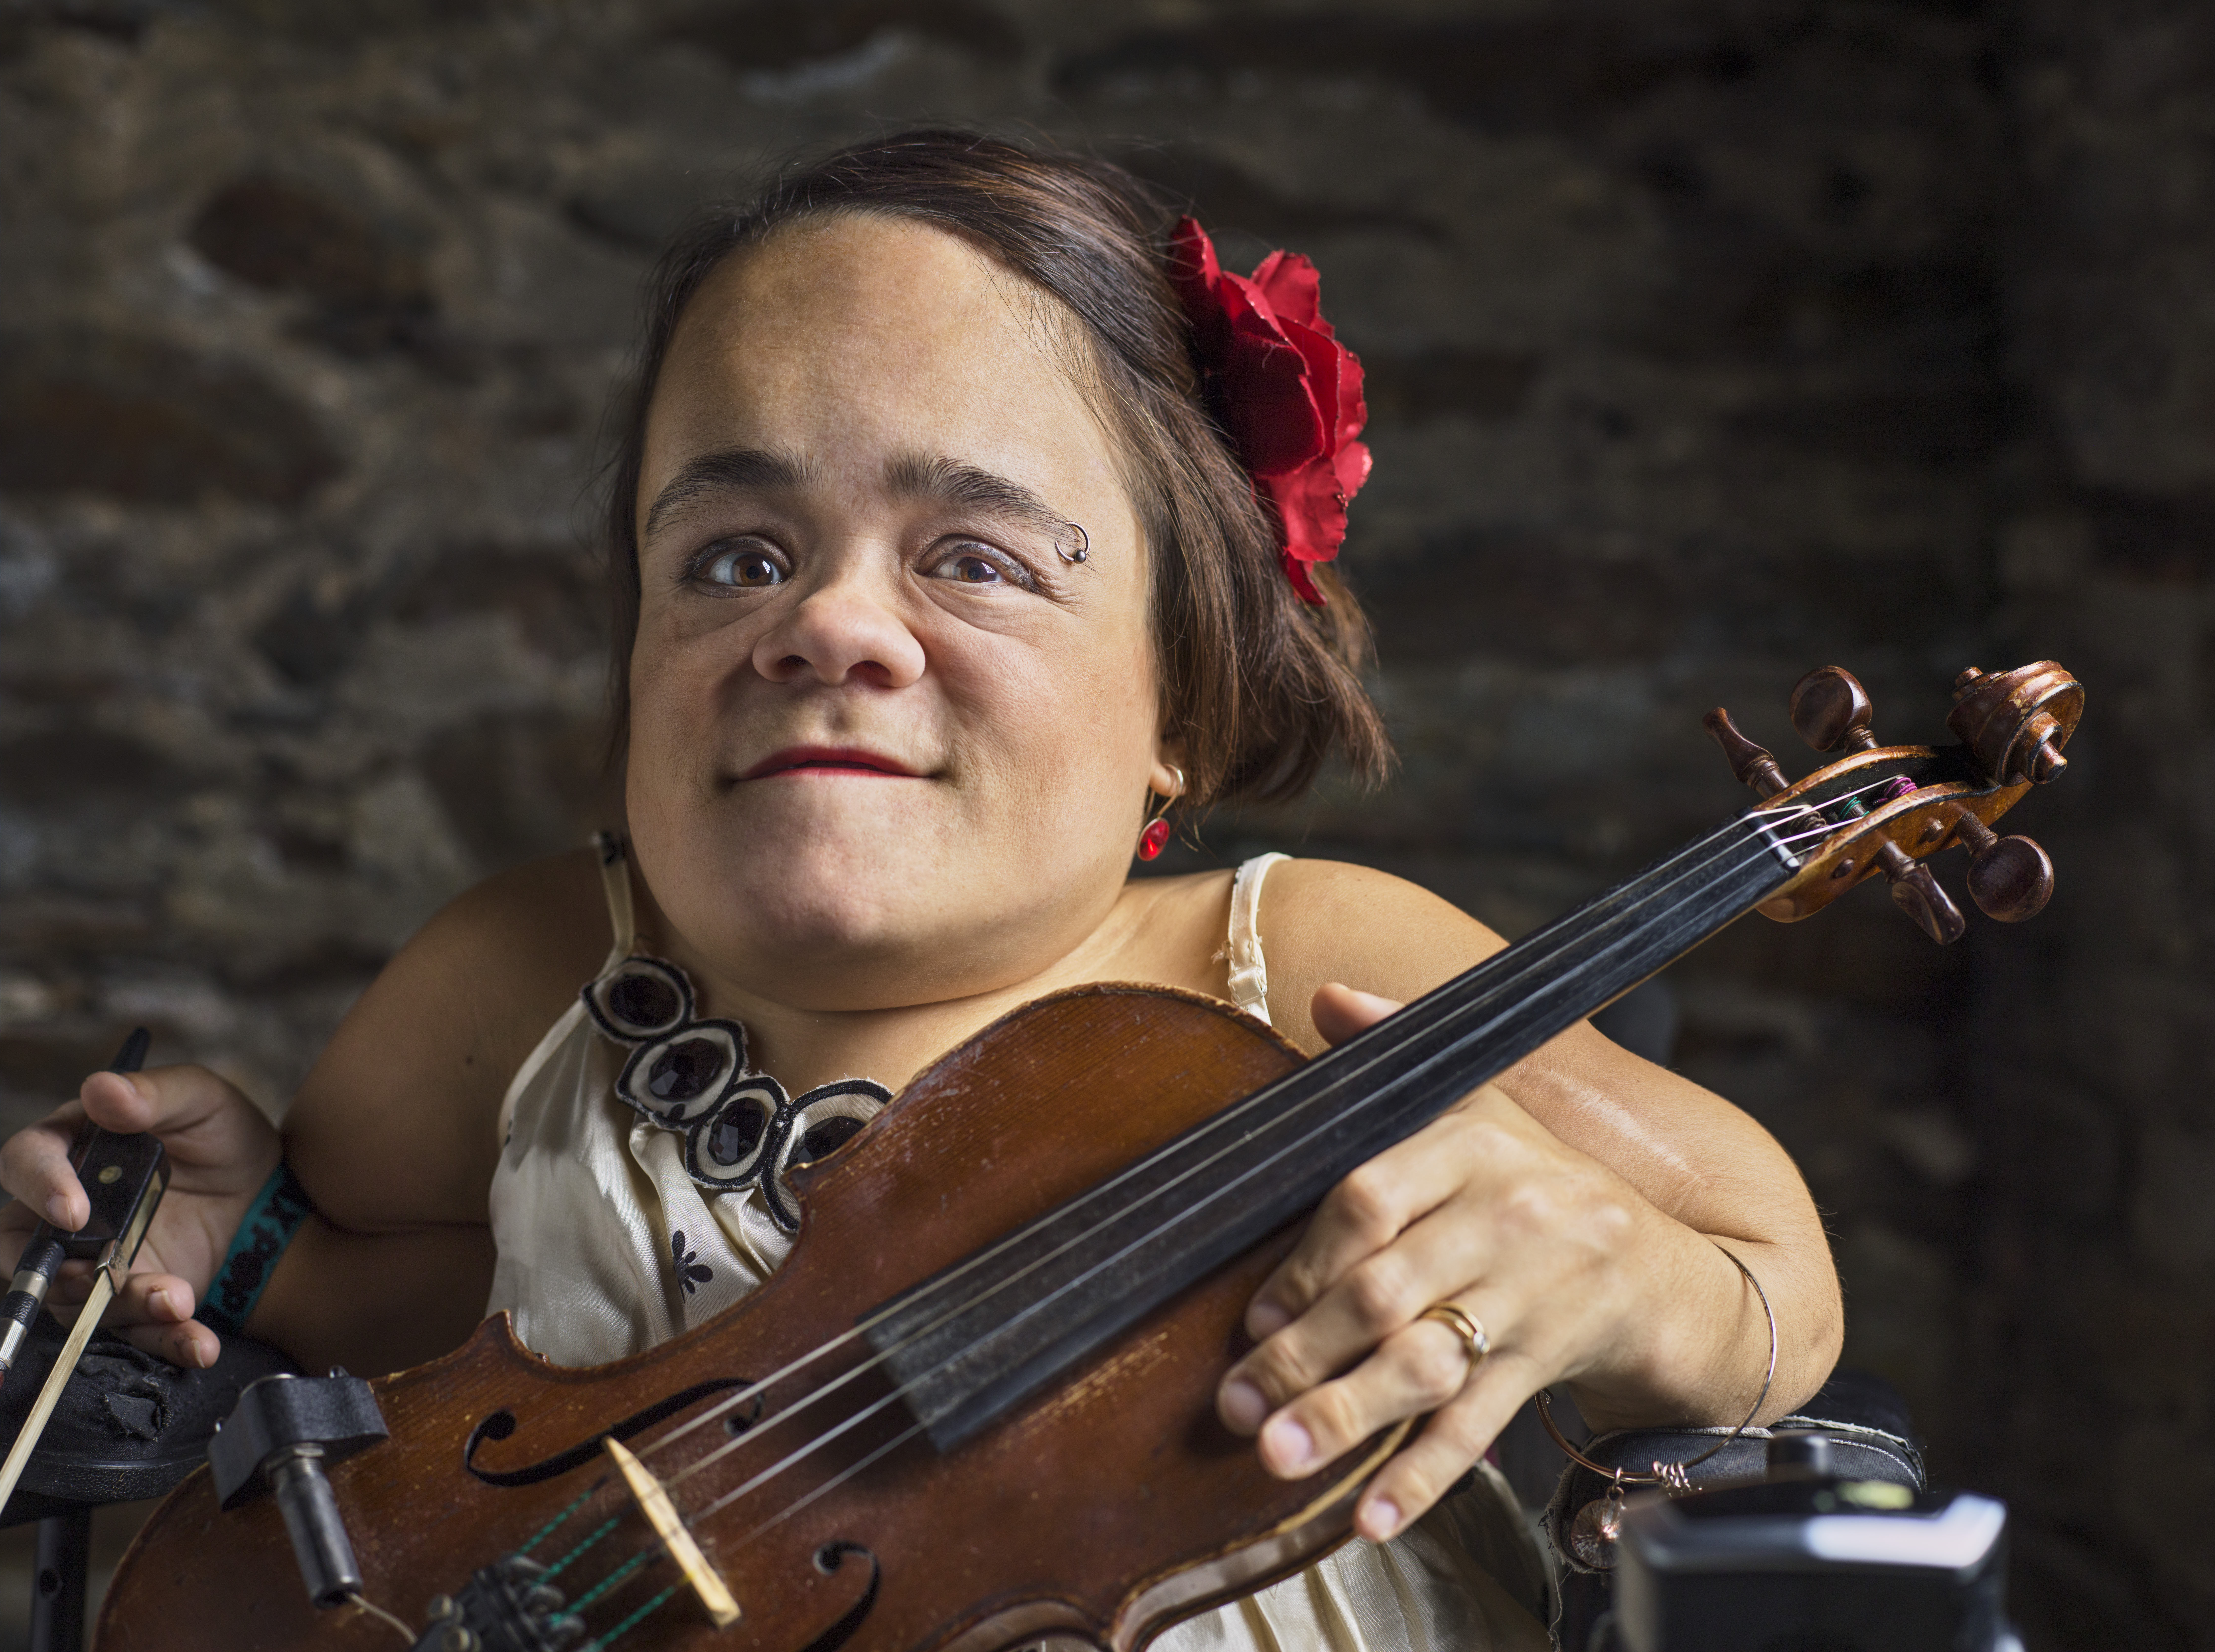 Photo of Gaelynn Lea, a woman holding a violin in her left hand and a bow in her right hand. Gaelynn is wearing a white sleeveless shirt and red flower in her chin-length brown hair. Her left elbow rests on the arm of her wheelchair. Photo by Paul Vienneau, paulvienneau.com